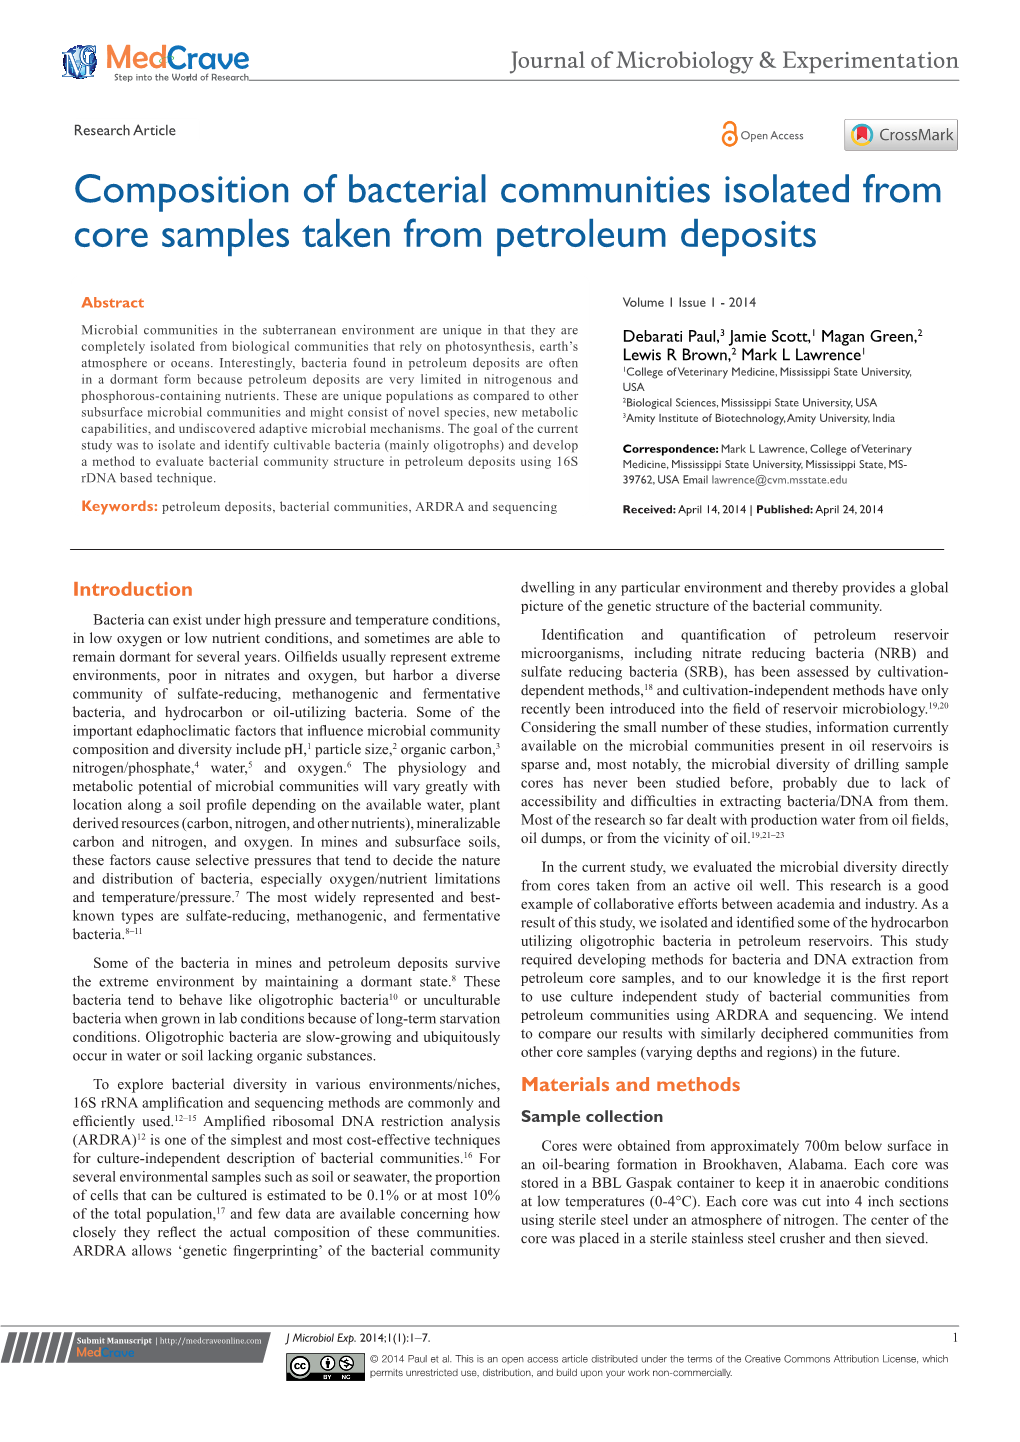 Composition of Bacterial Communities Isolated from Core Samples Taken from Petroleum Deposits